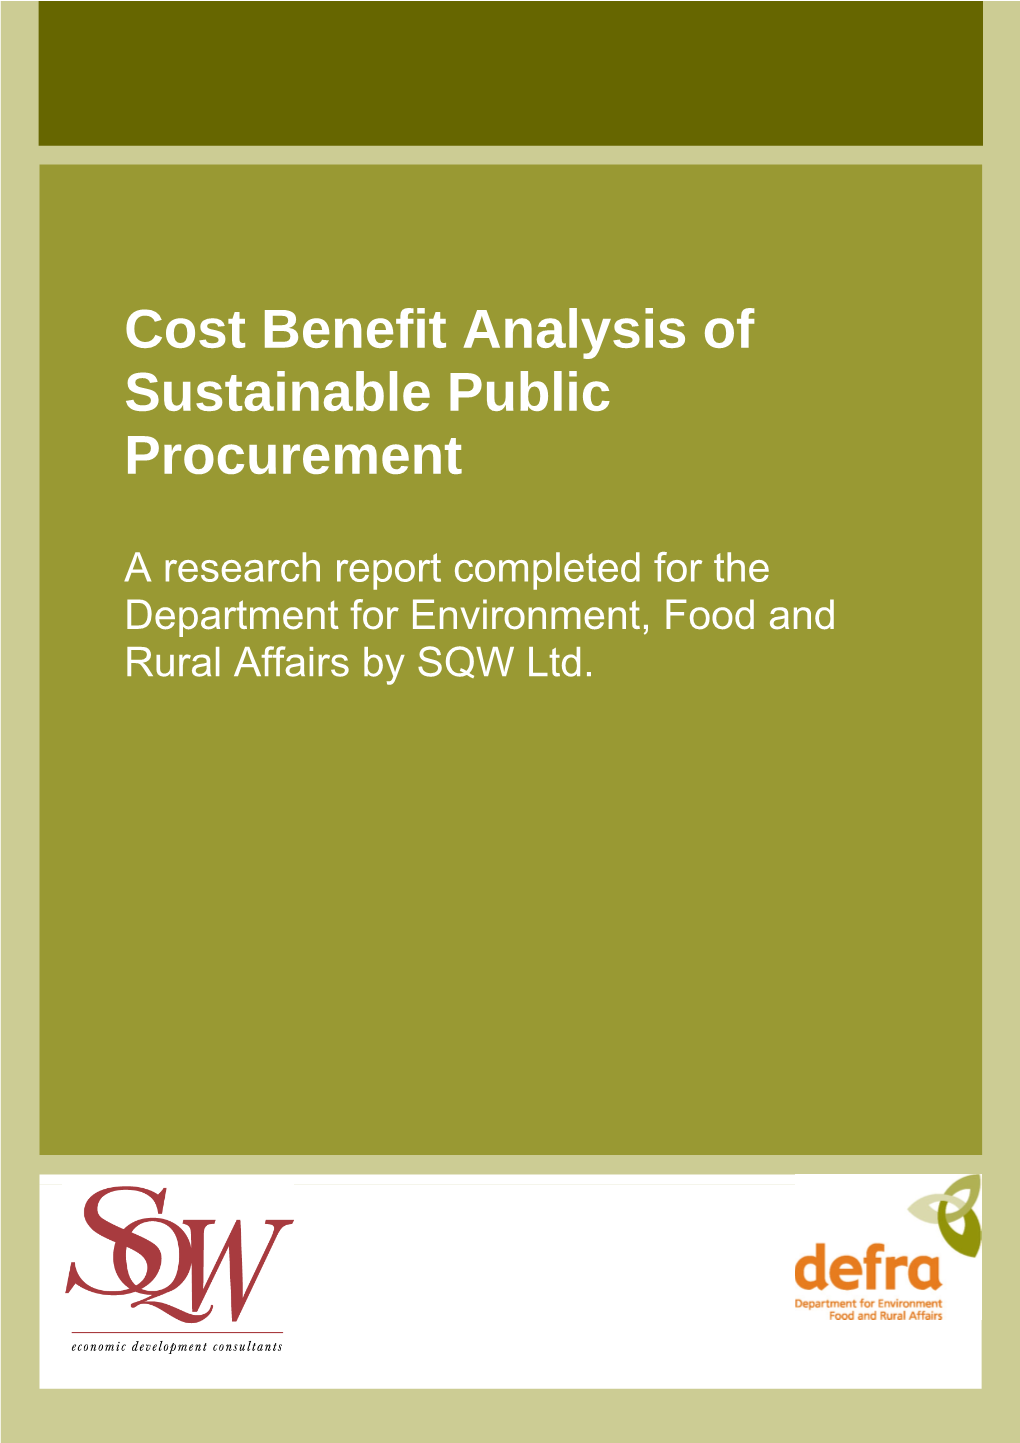 Cost Benefit Analysis of Sustainable Public Procurement